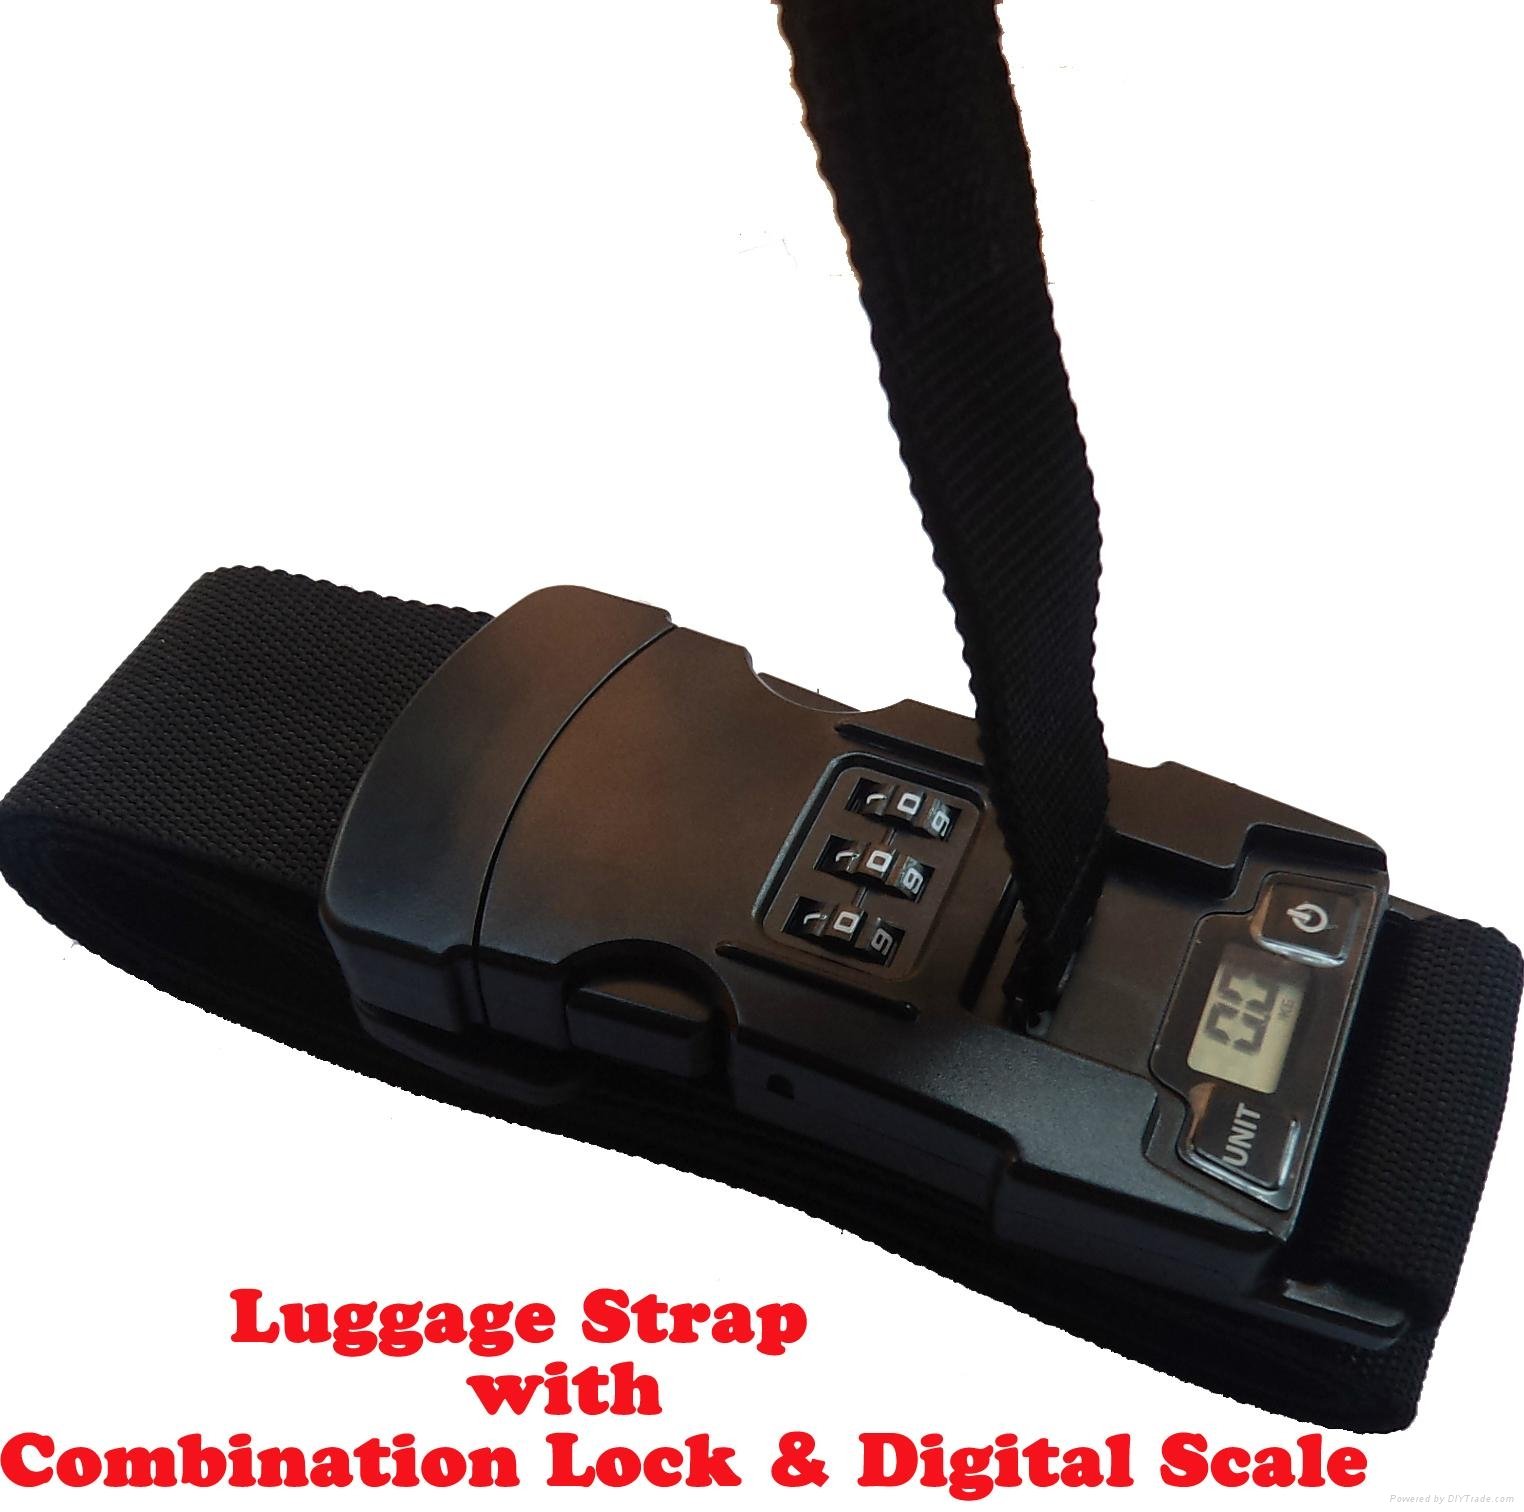 L   age strap with combination lock and digital scale